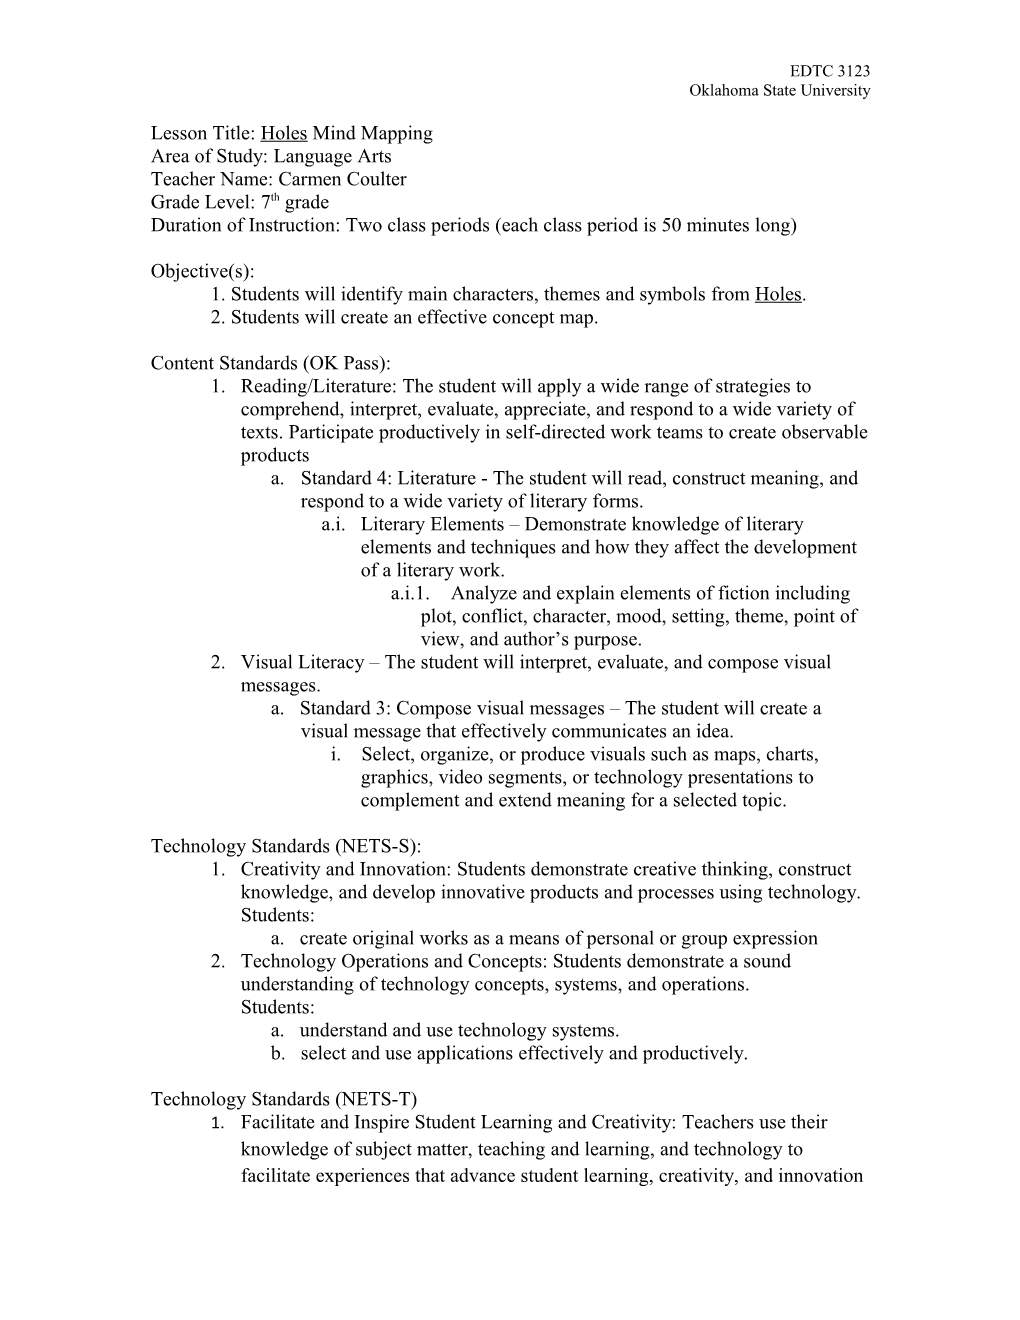 Lesson Plan Template s16